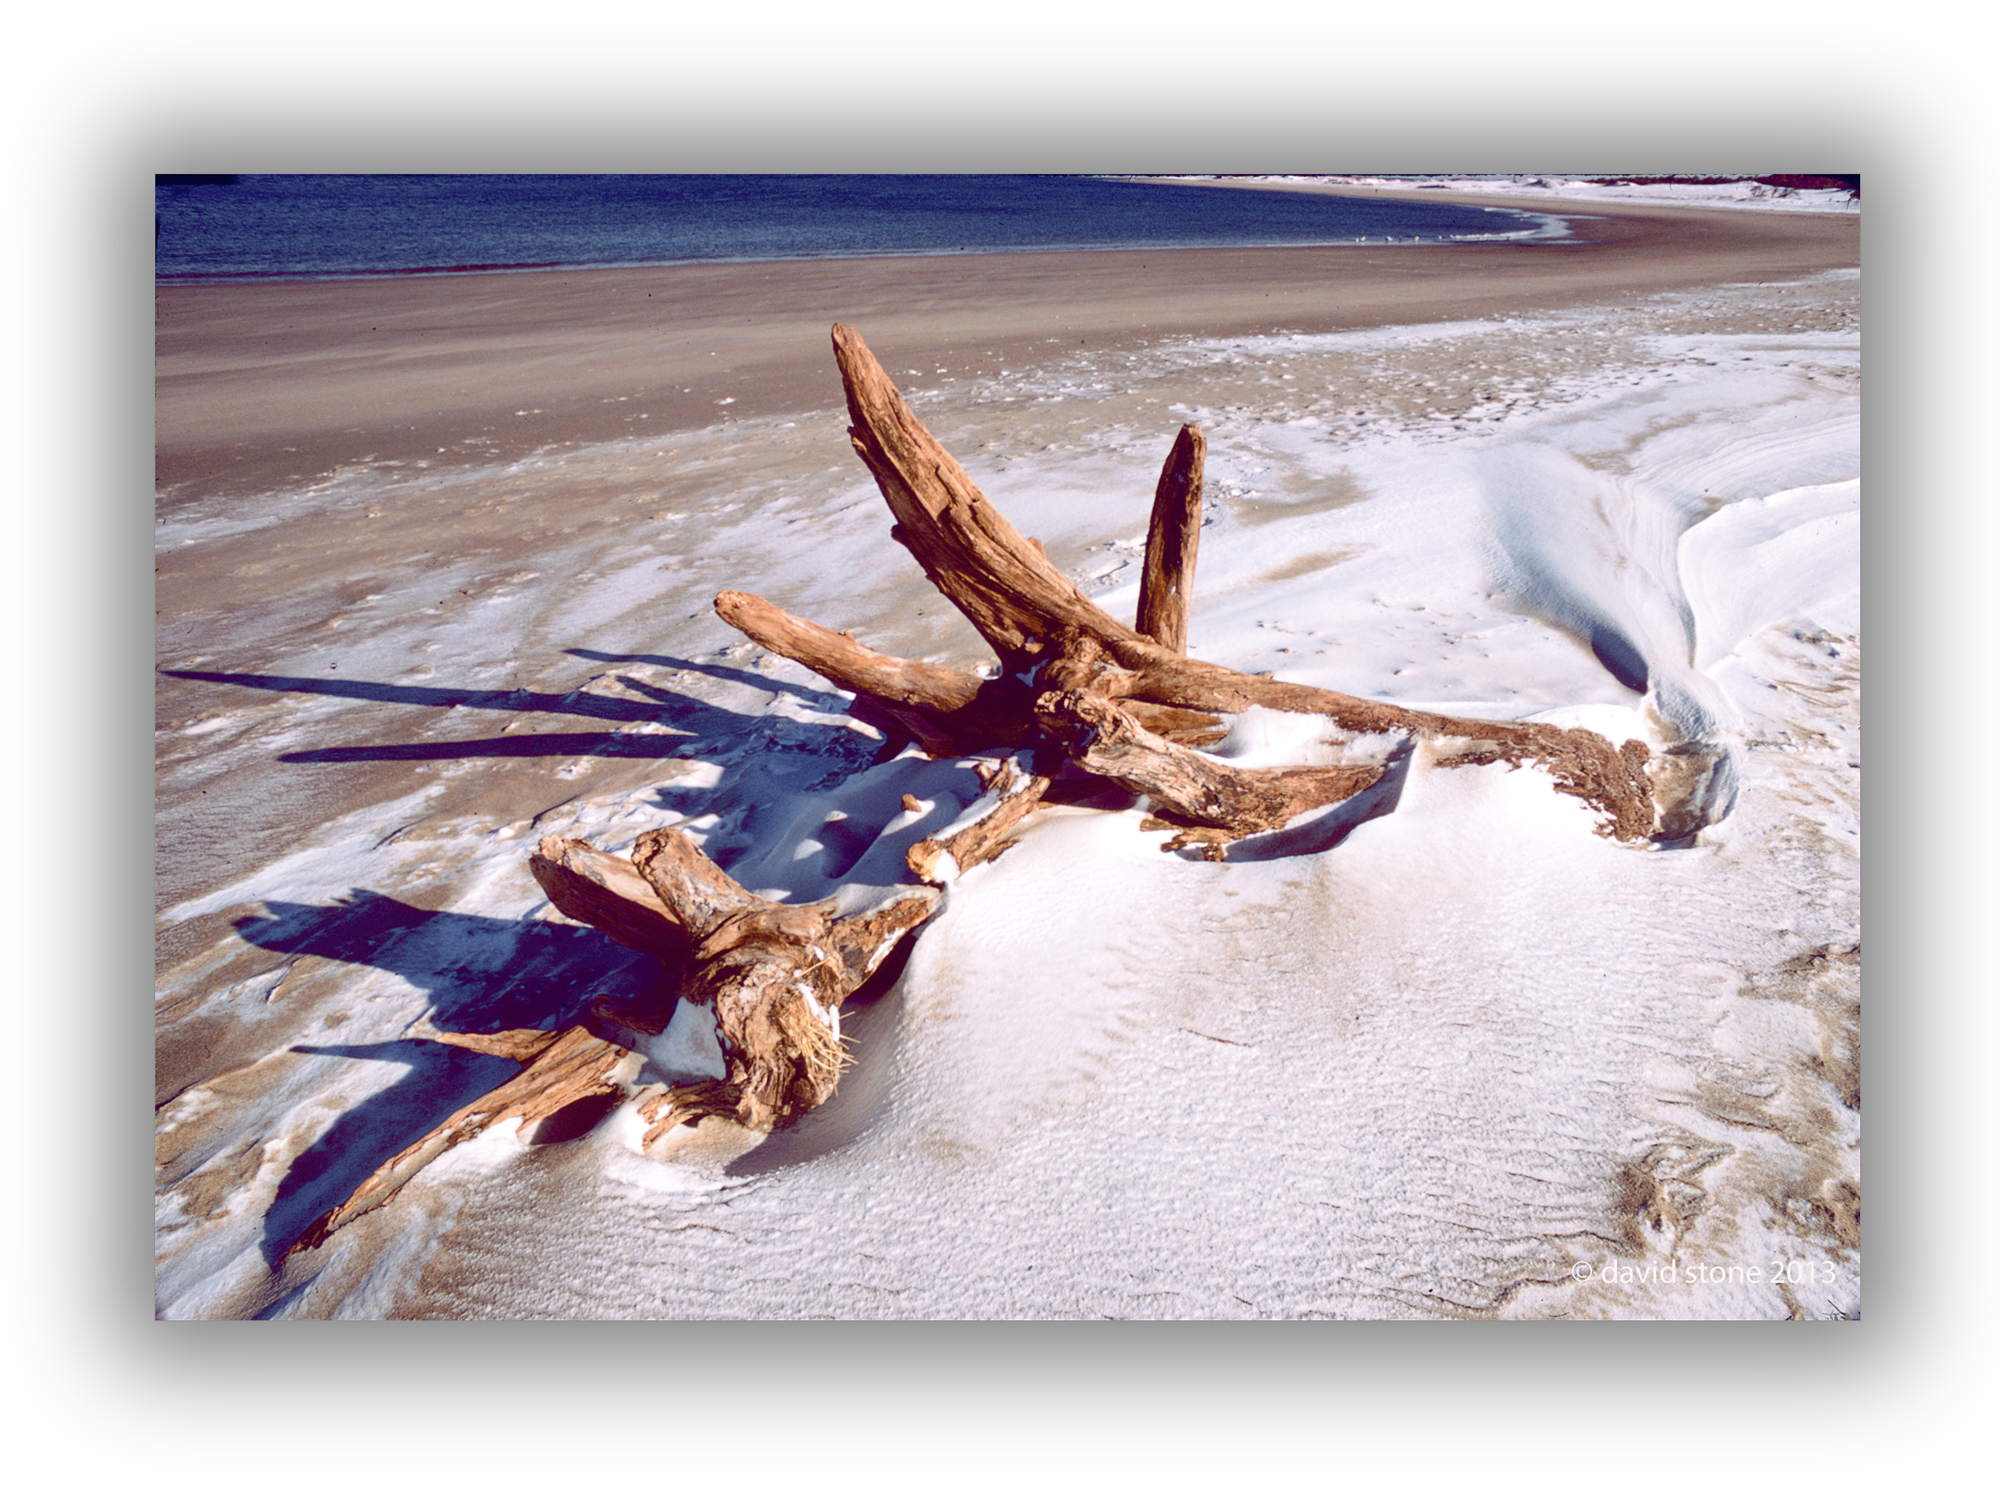 Driftwood And Snow At Crane Beach (user submitted)